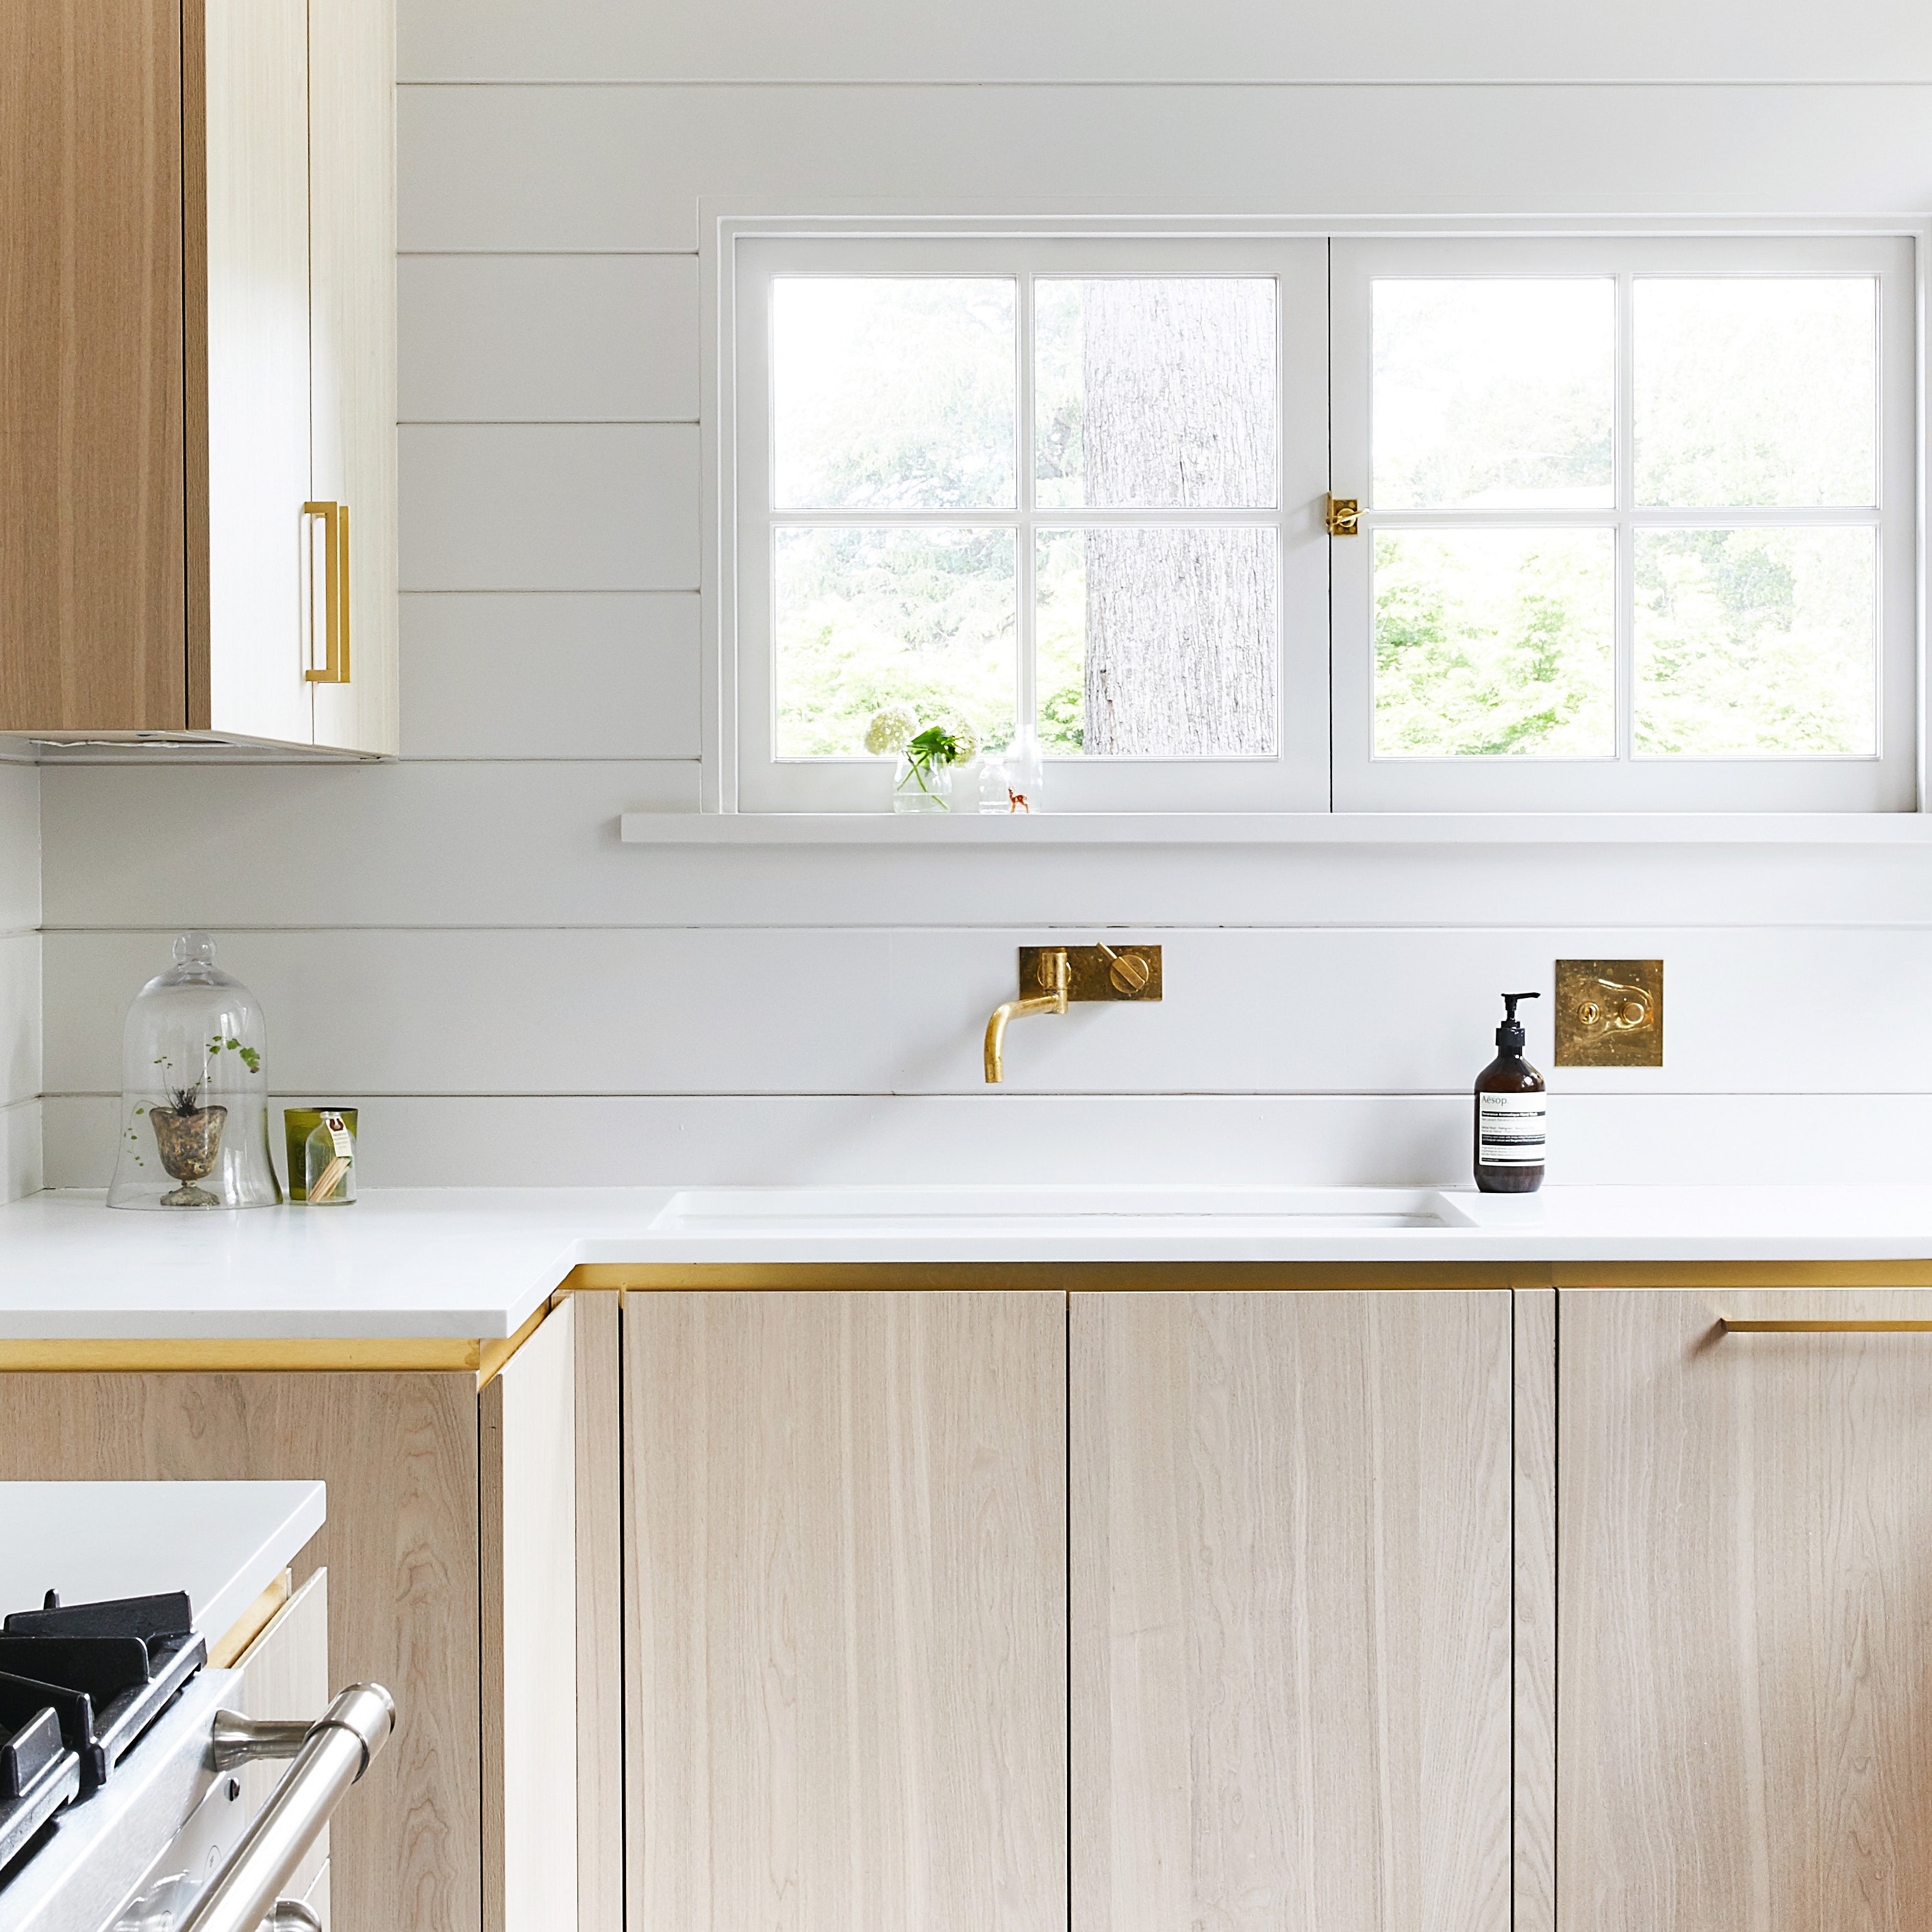 The Finishing Touch Your Kitchen Cabinets Need